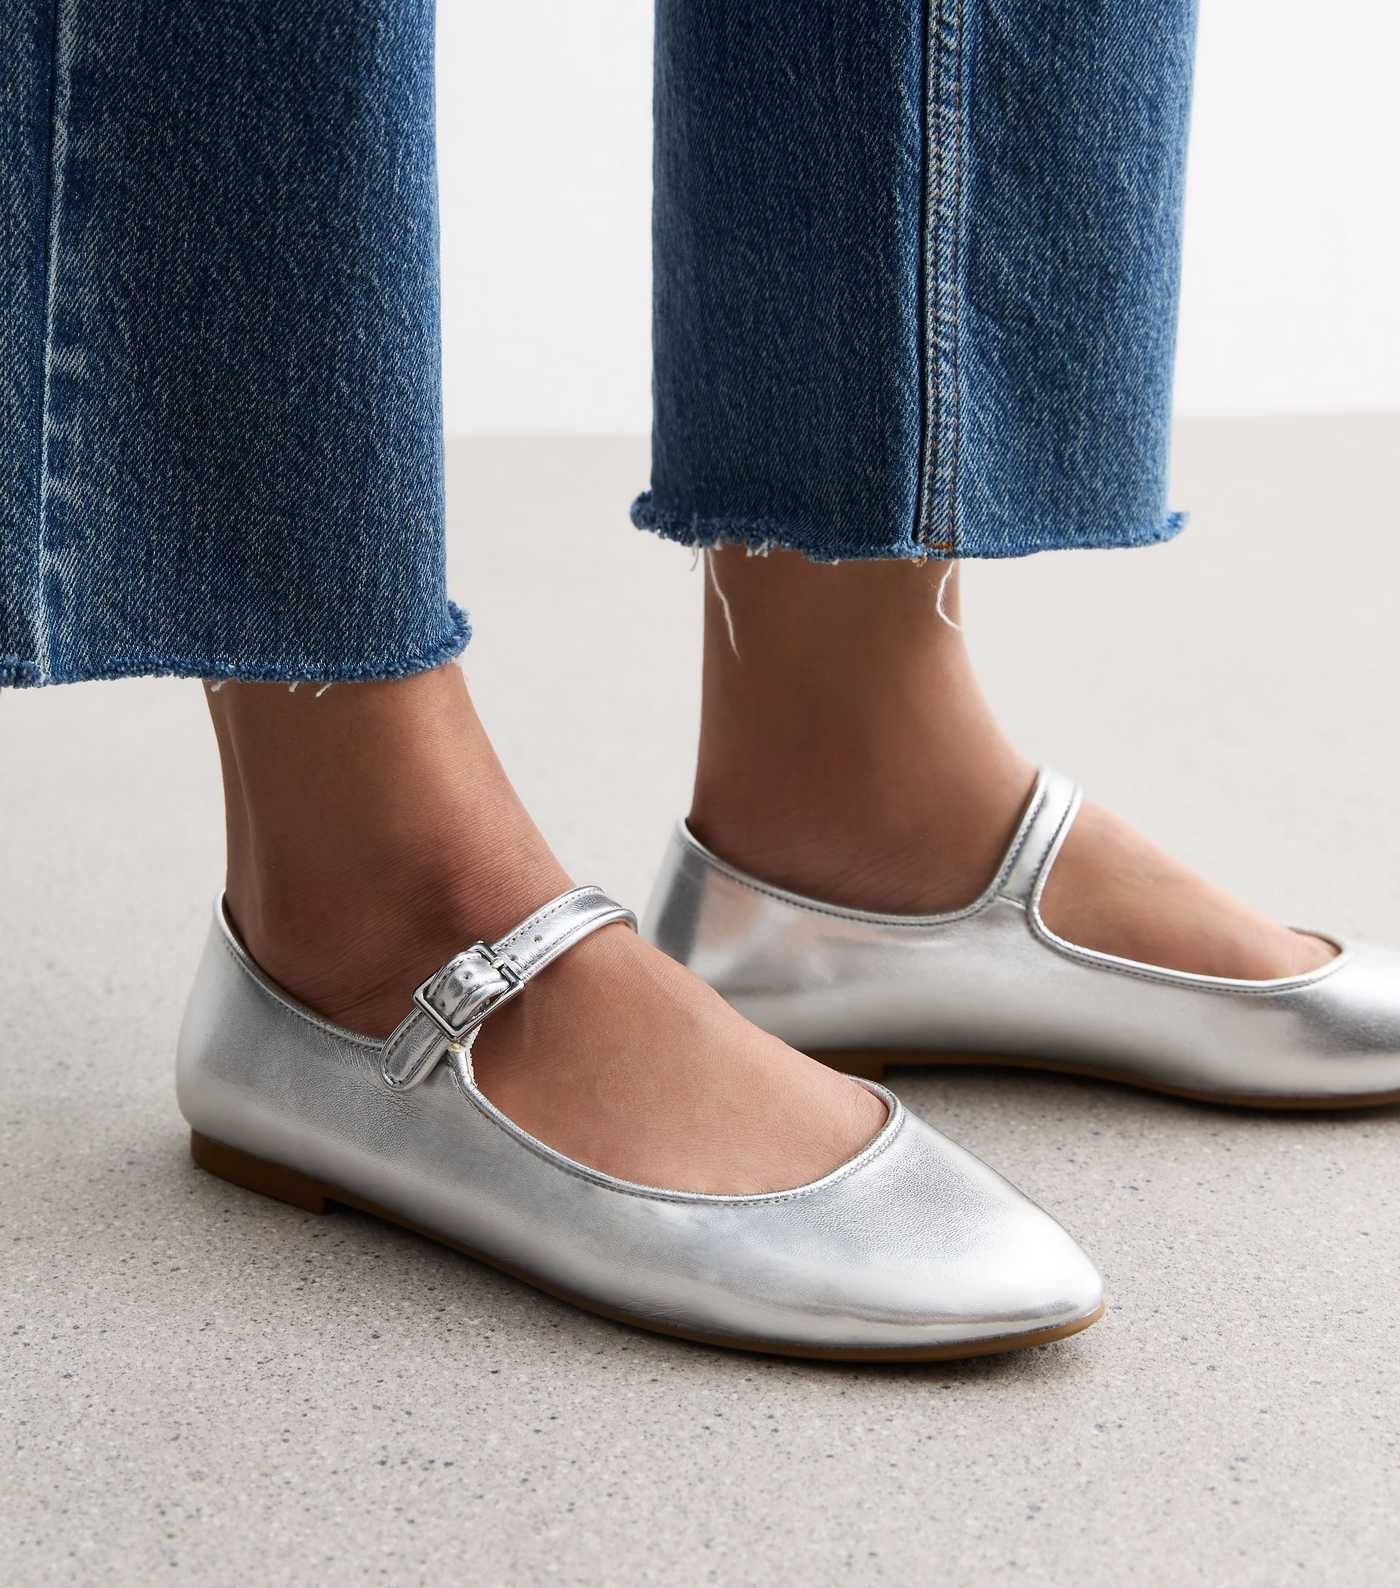 Silver Strappy Mary Jane Ballerina Pumps
						
						Add to Saved Items
						Remove from Saved ... | New Look (UK)